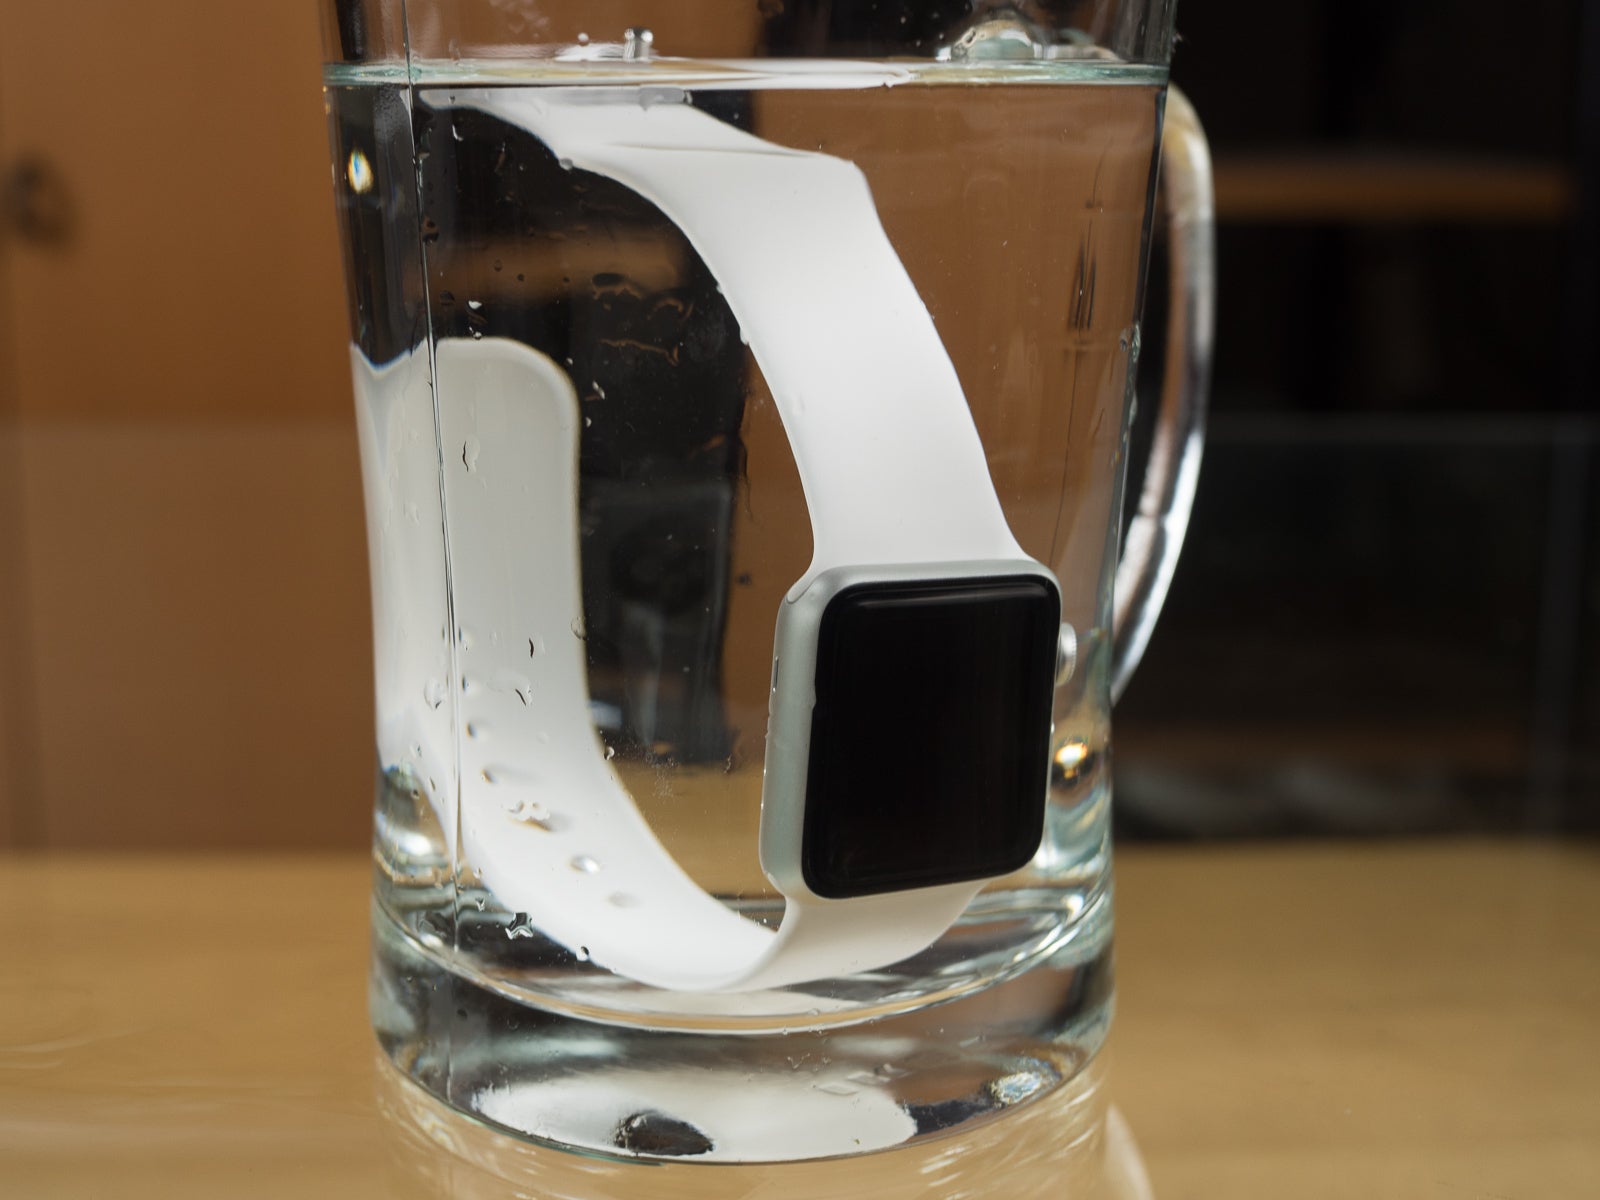 Yep. Temporary total submersion doesn't mean waterproof. - Everything you need to know about waterproof smartwatches